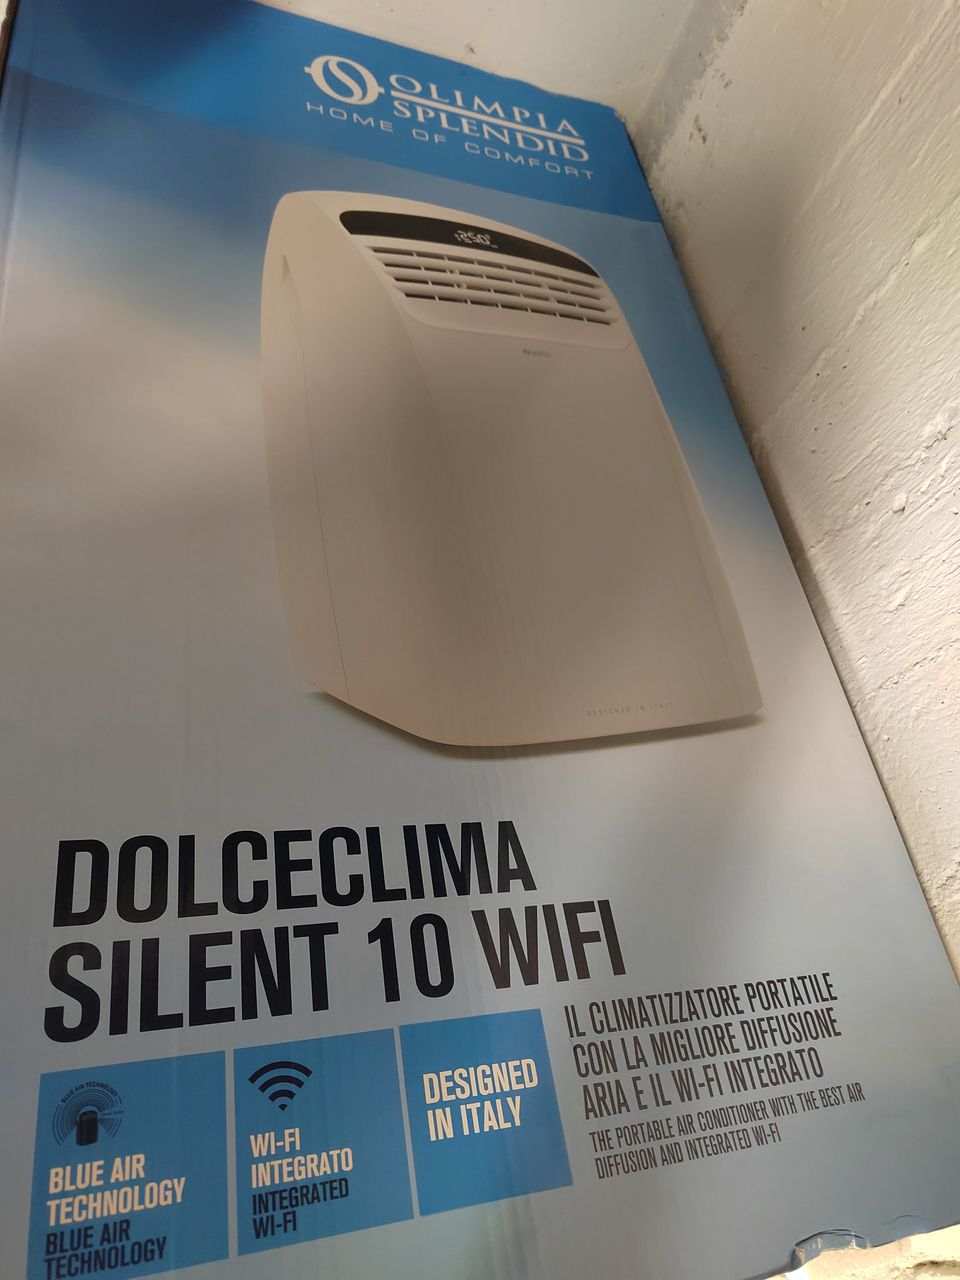 Dolceclima silent 10 wifi